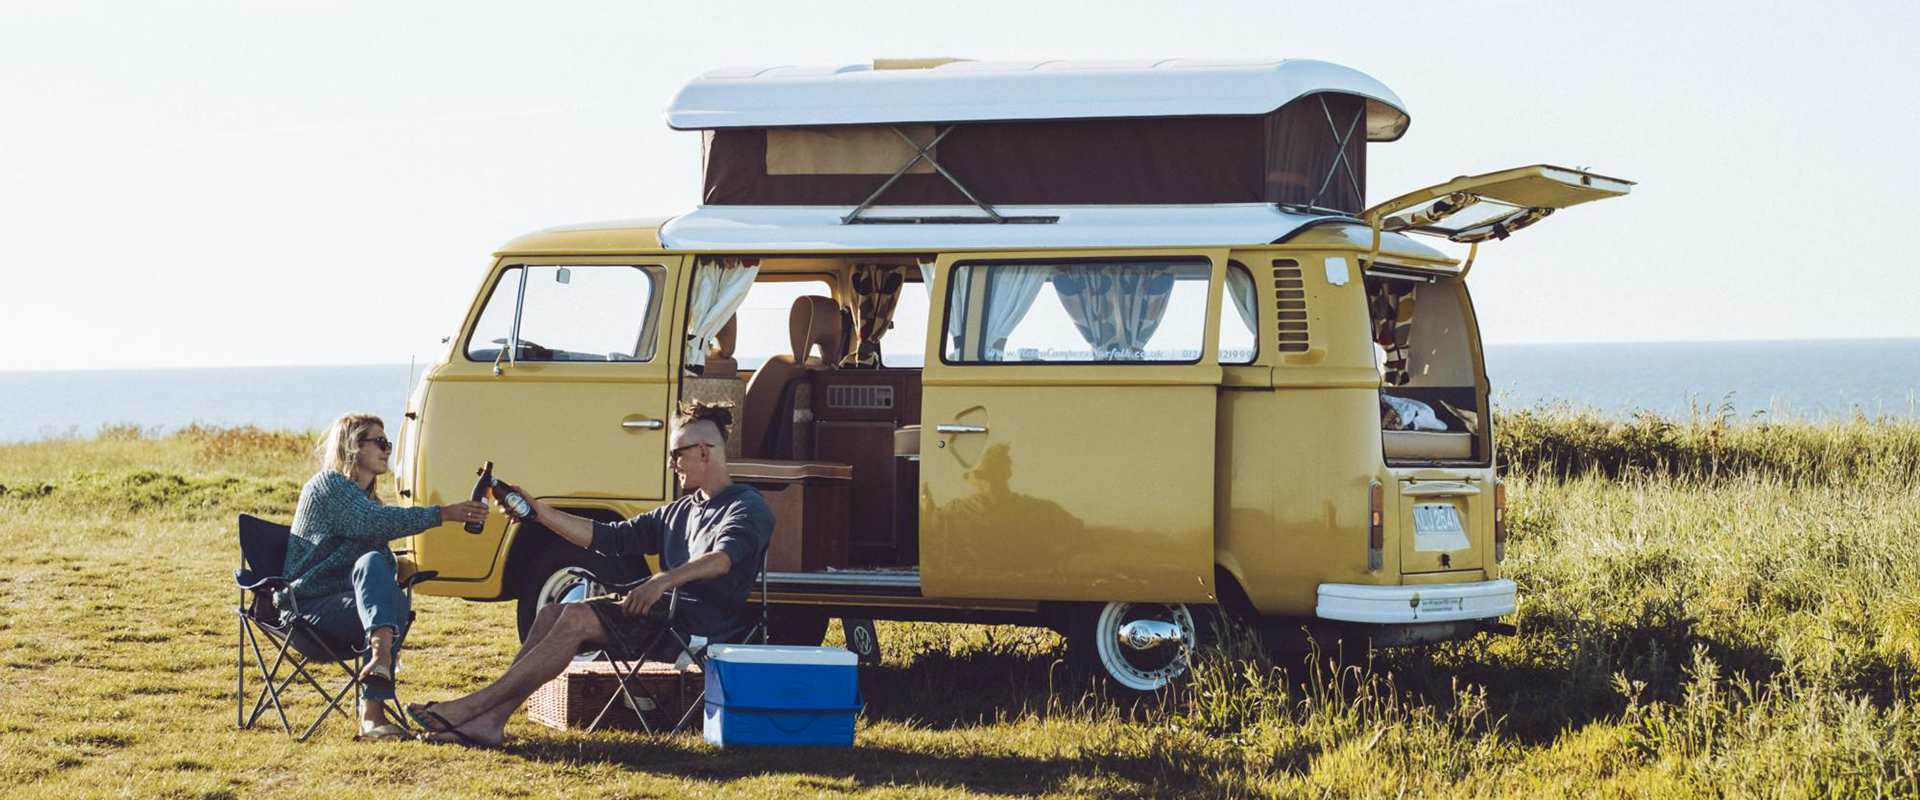 10 Van Life Essentials to  Get You on the Road